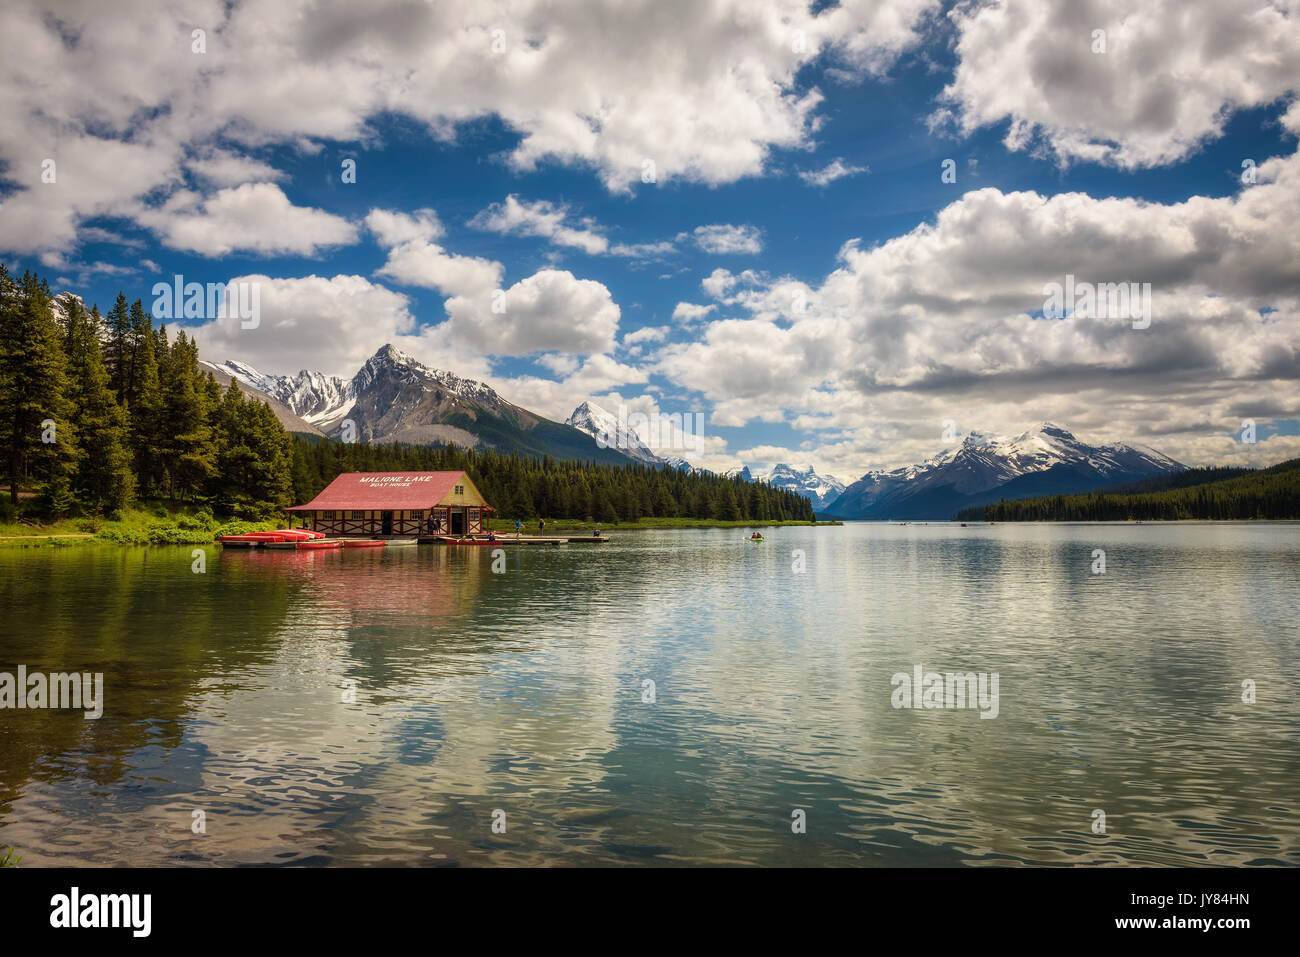 Boat house and the idyllic Maligne Lake in Jasper National Park, Canada, with snow-covered peaks of canadian Rocky Mountains in the background. Stock Photo